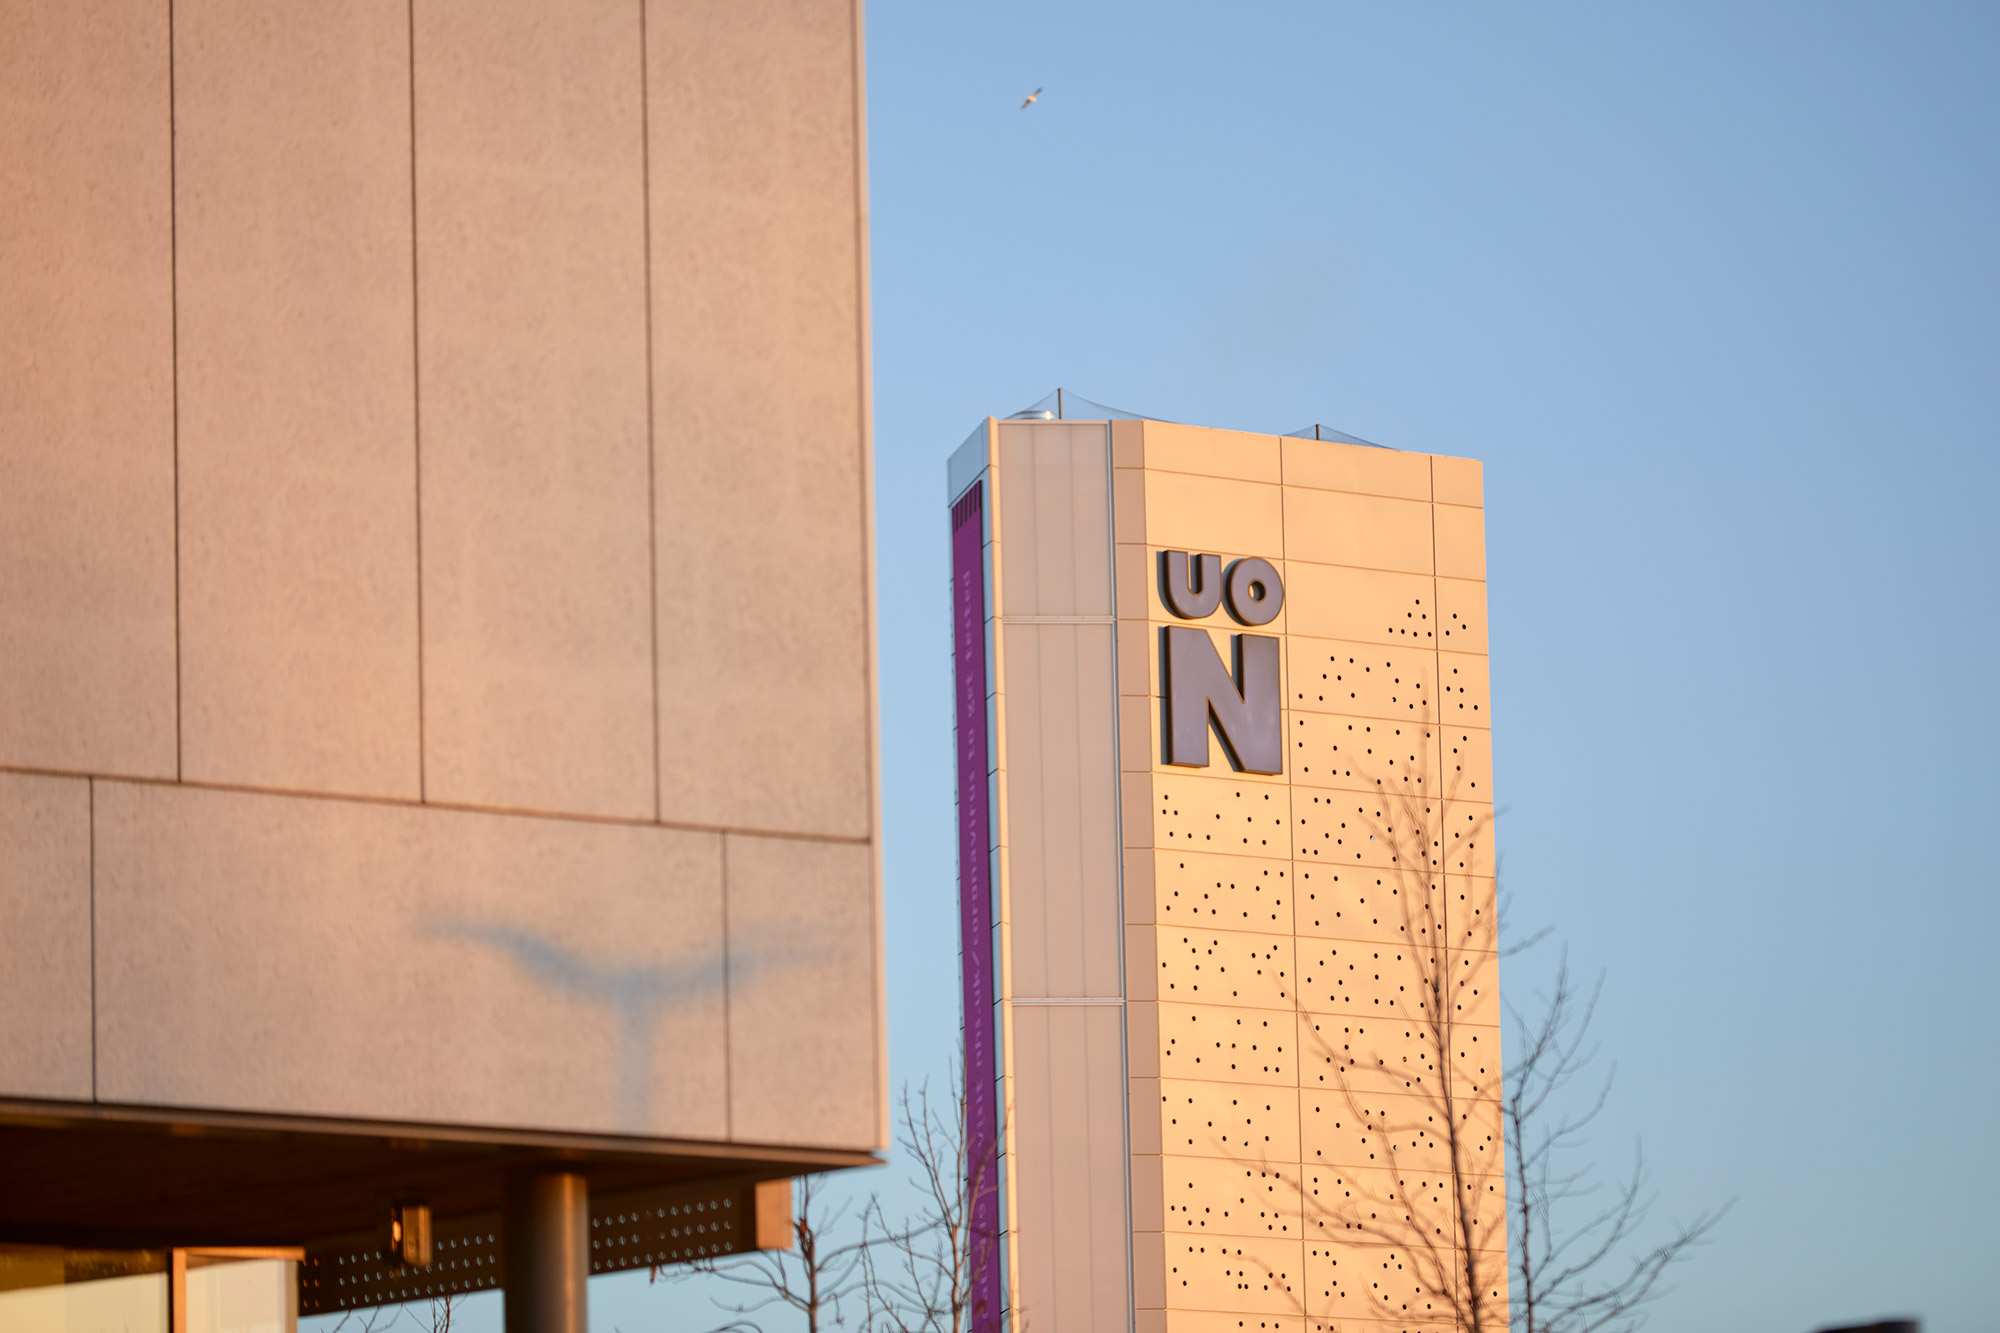 Glimpse of the energy centre at the University of Northampton, the 'UON' letters seen at the top of the tower part of the energy centre.